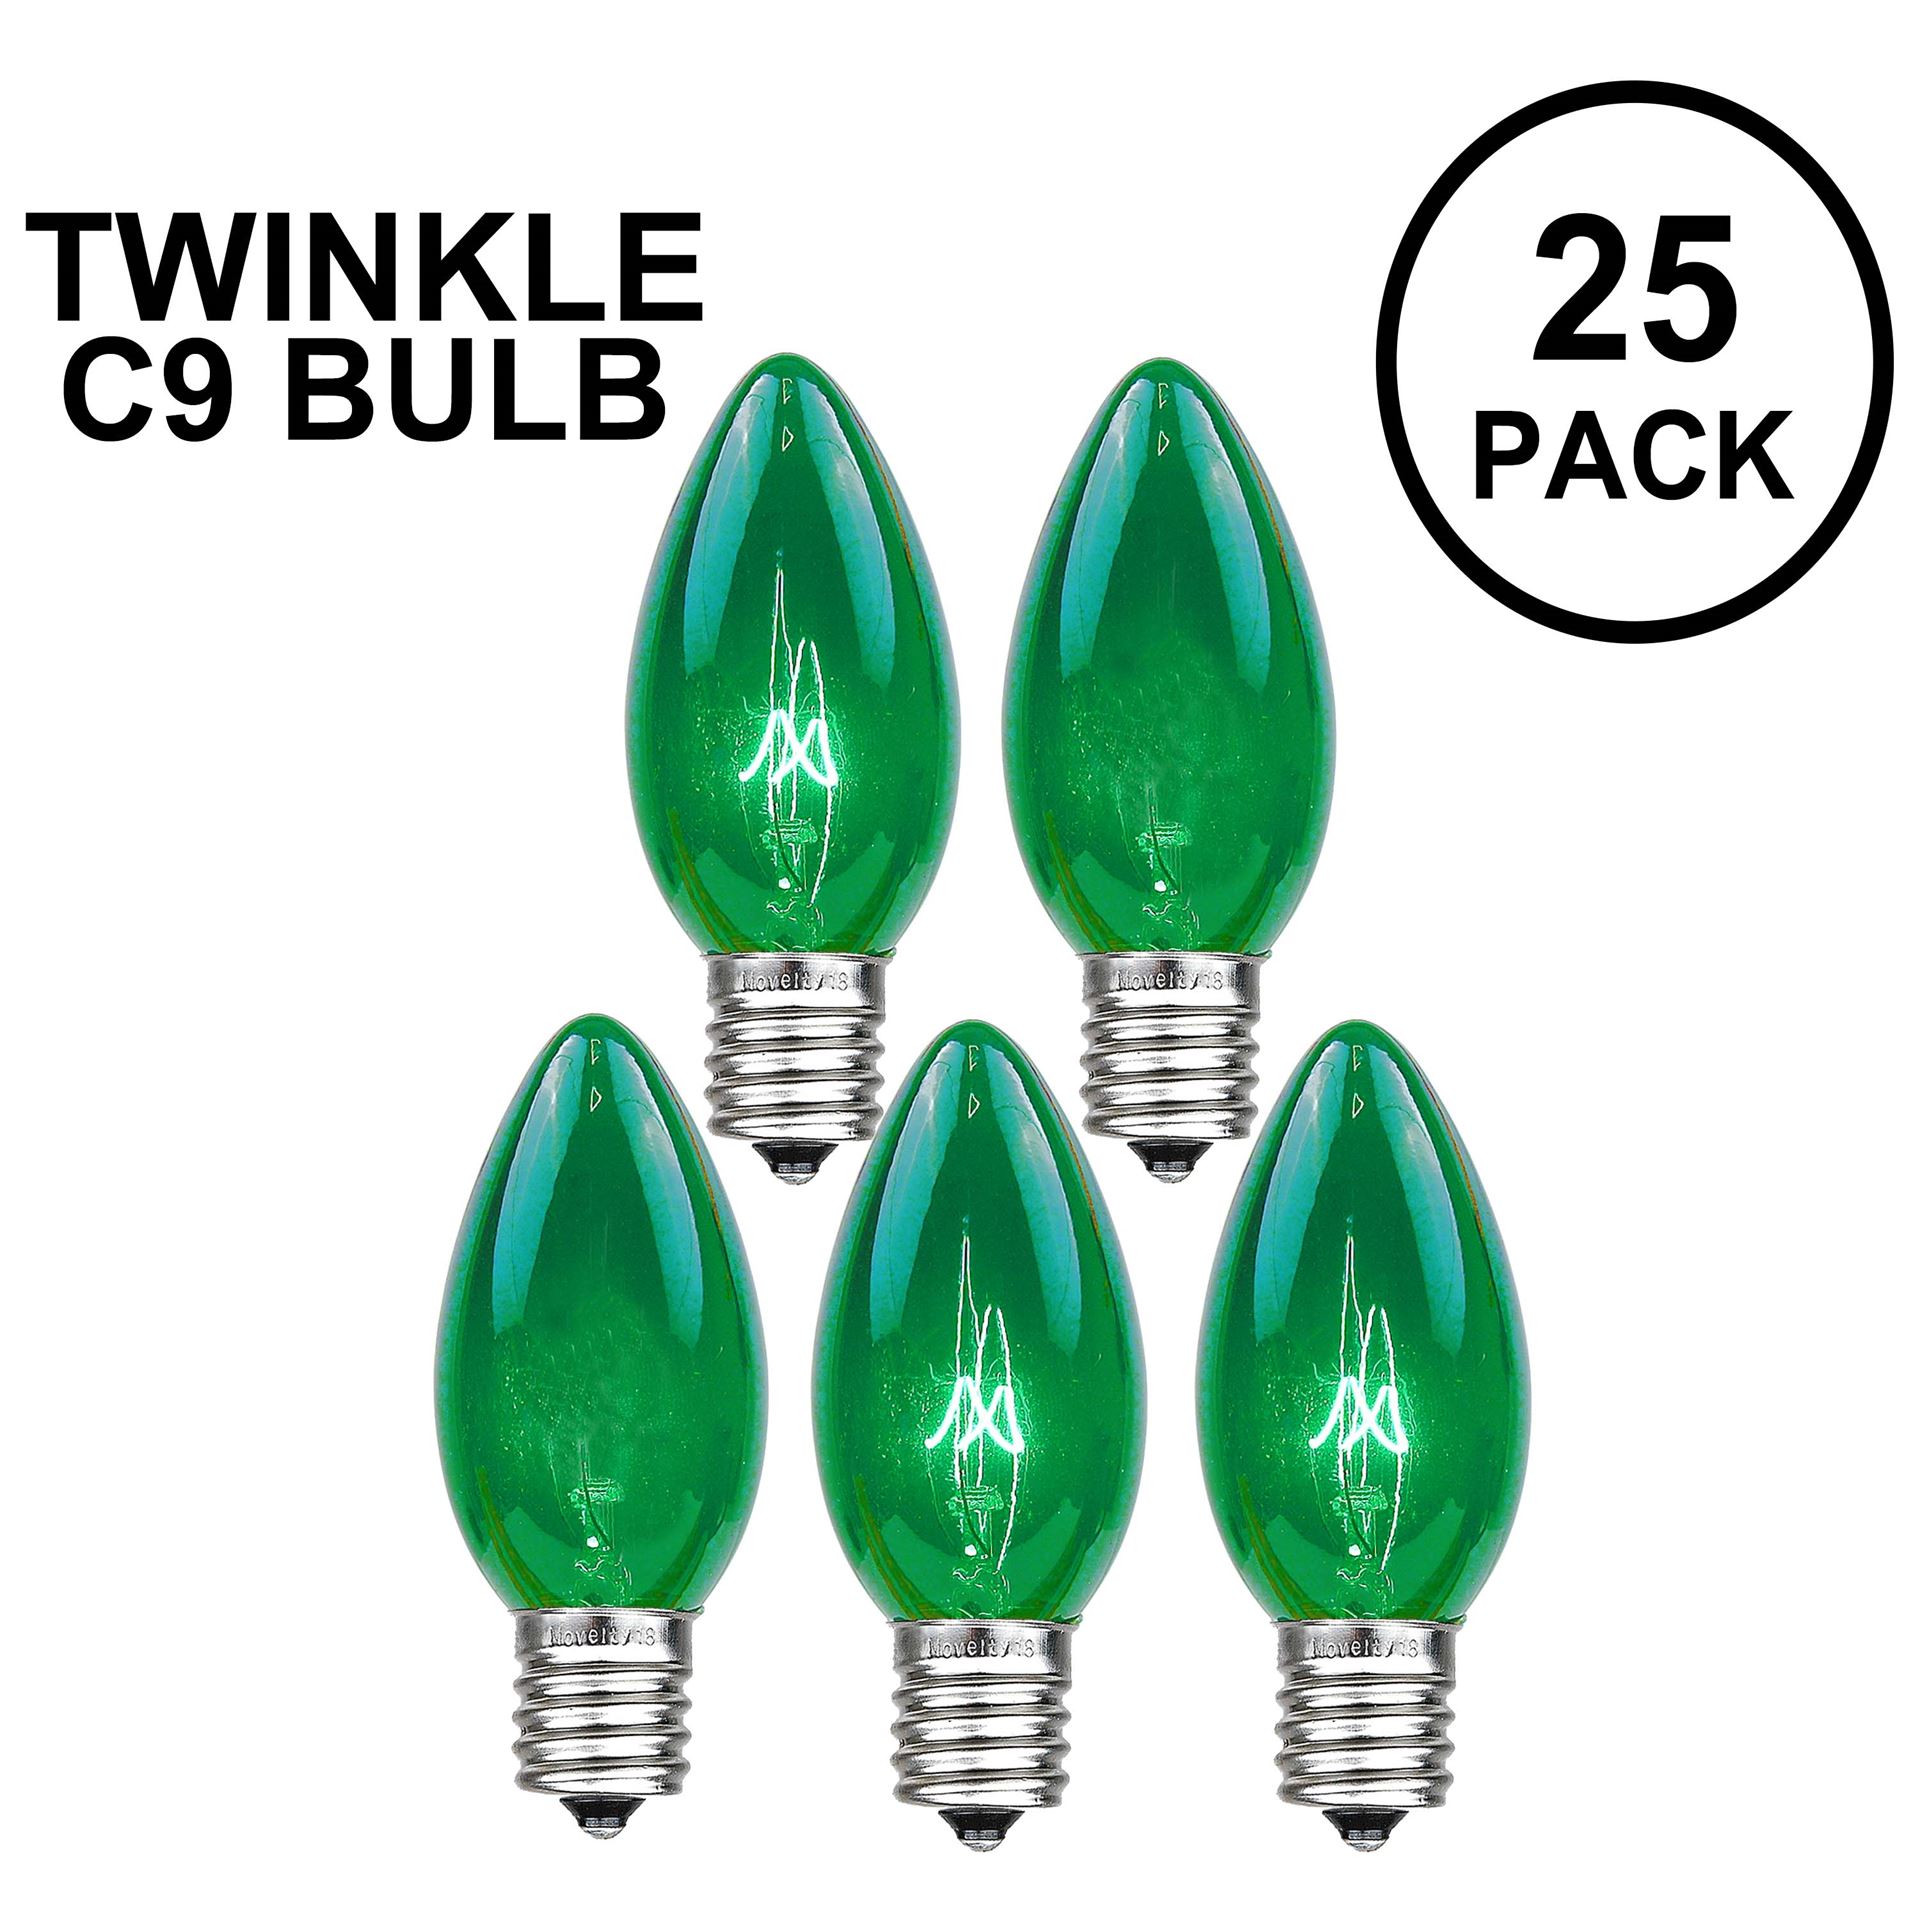 Picture of Green Twinkle C9 Bulbs 7 Watt Replacement Lamps 25 Pack